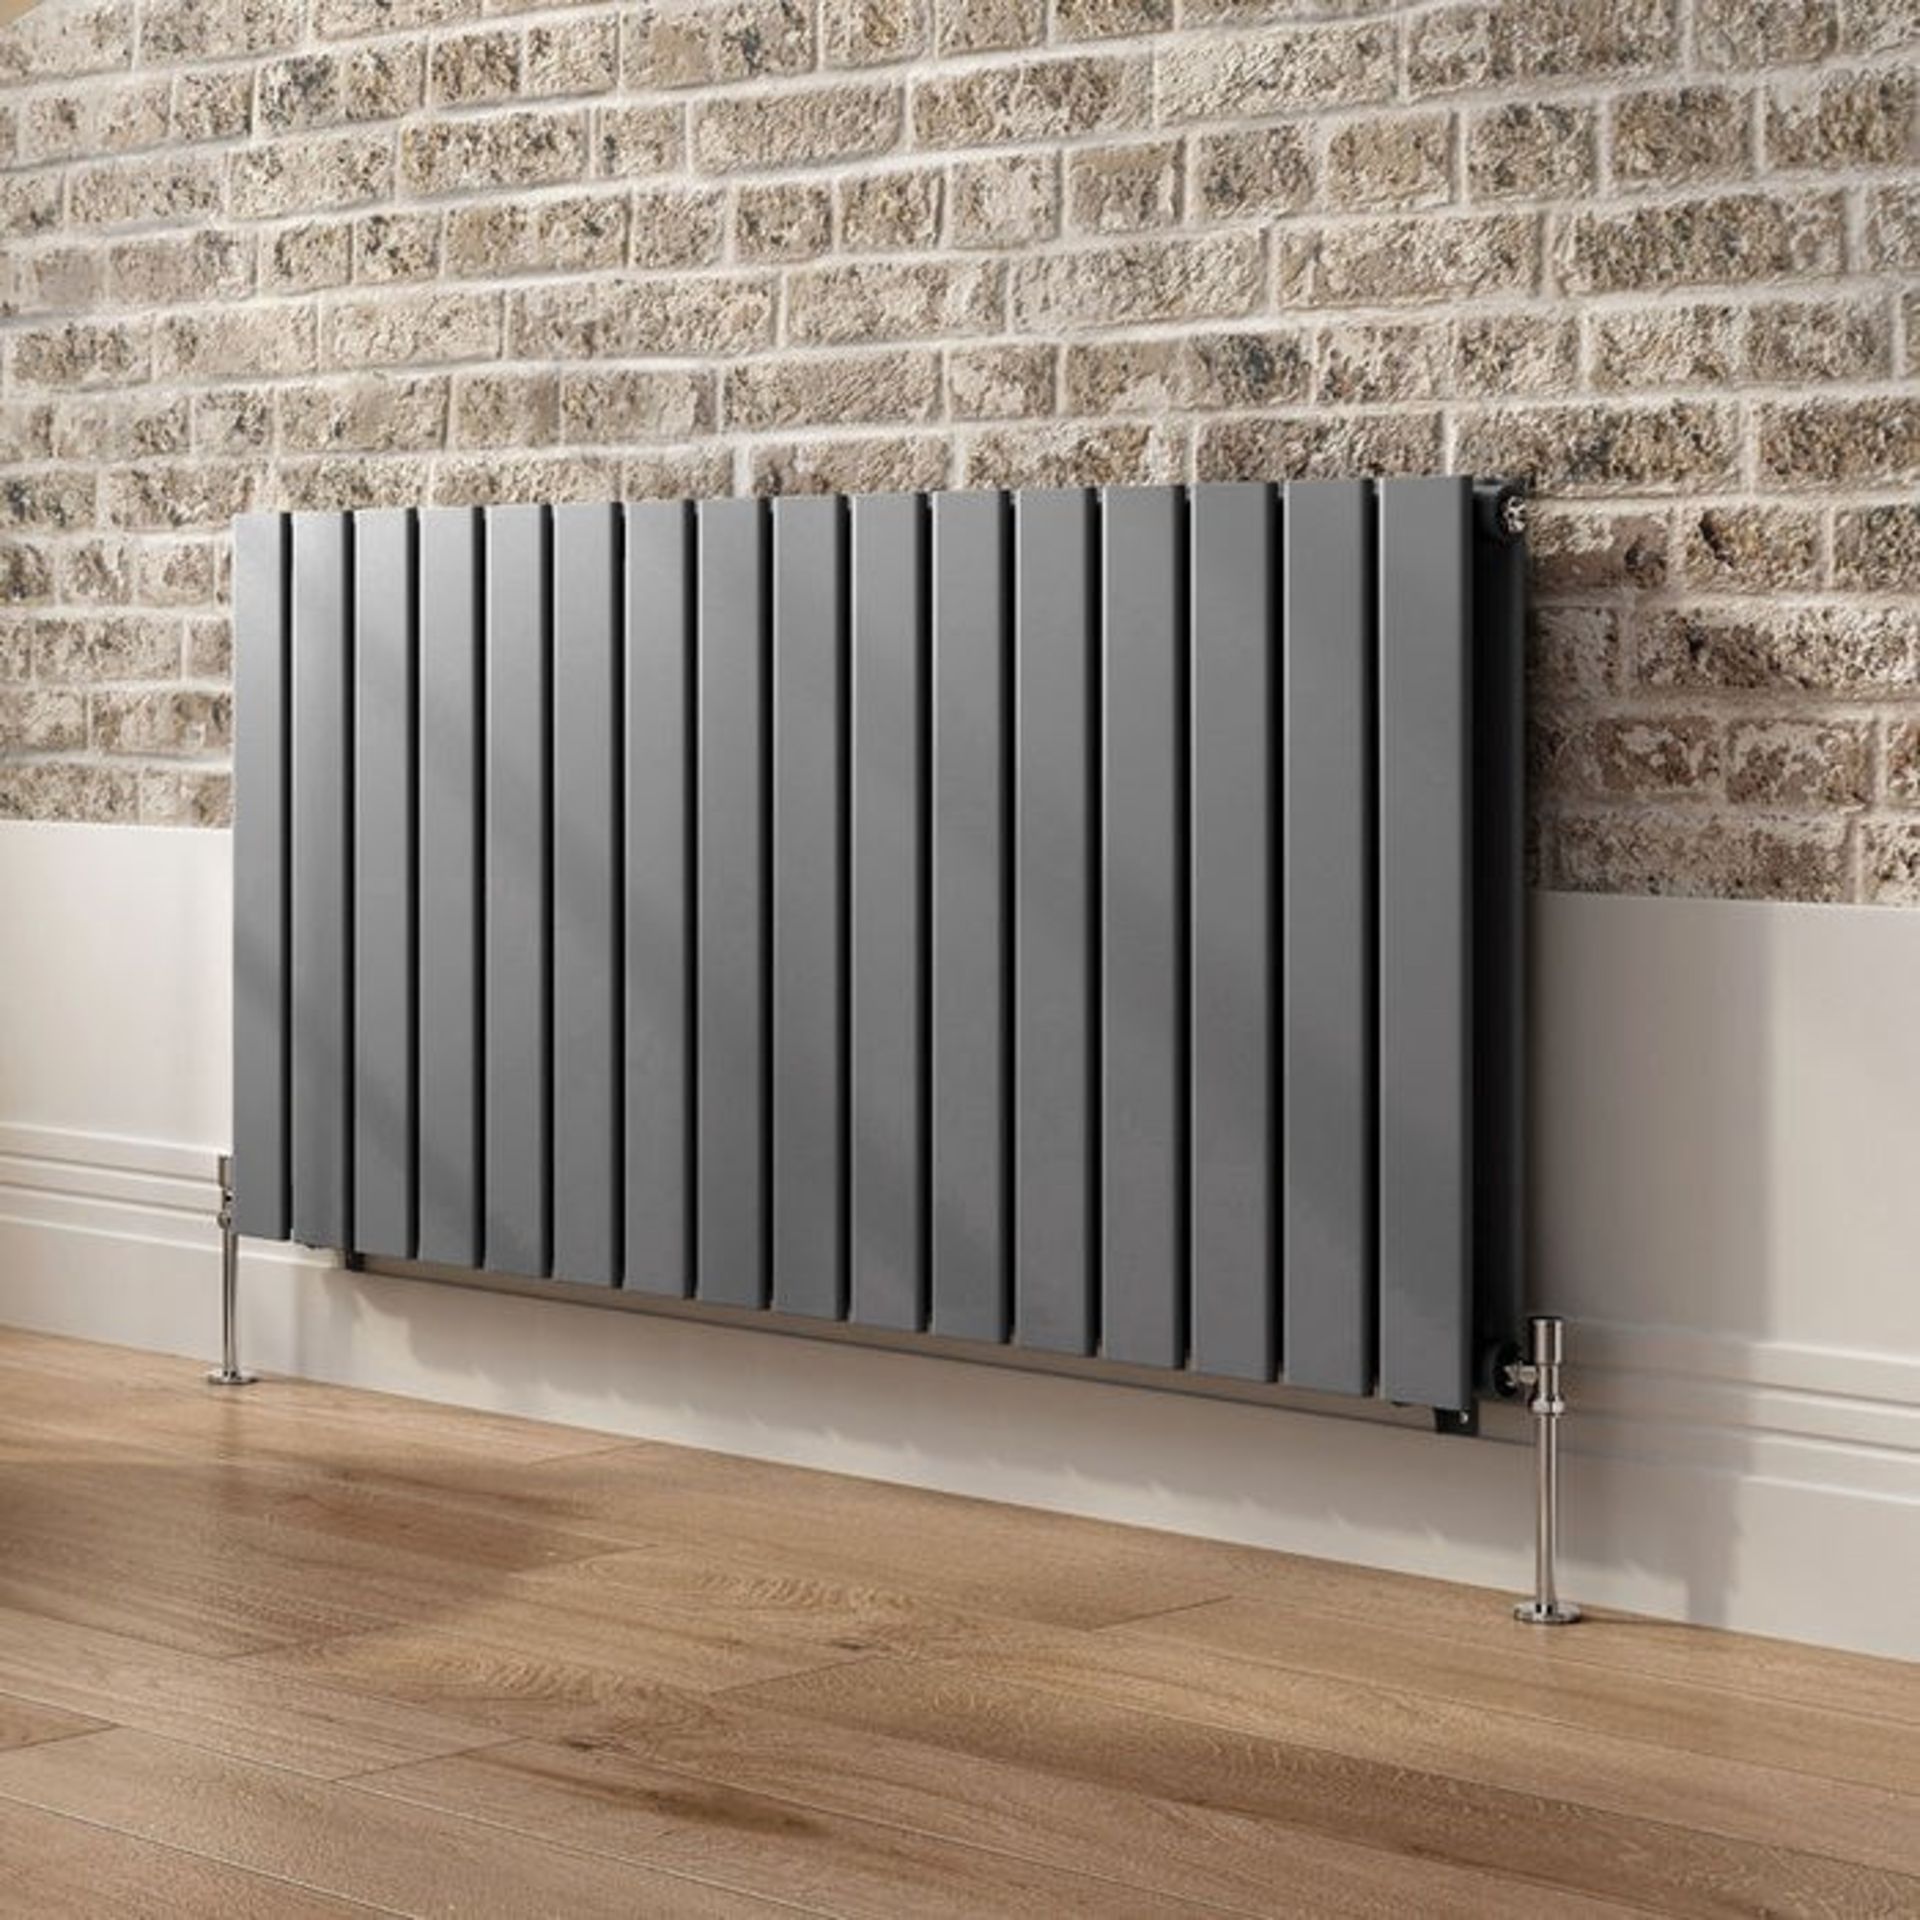 600x1210mm Anthracite Double Flat Panel Horizontal Radiator. RRP £549.99.Made with low carbon ... - Image 3 of 3